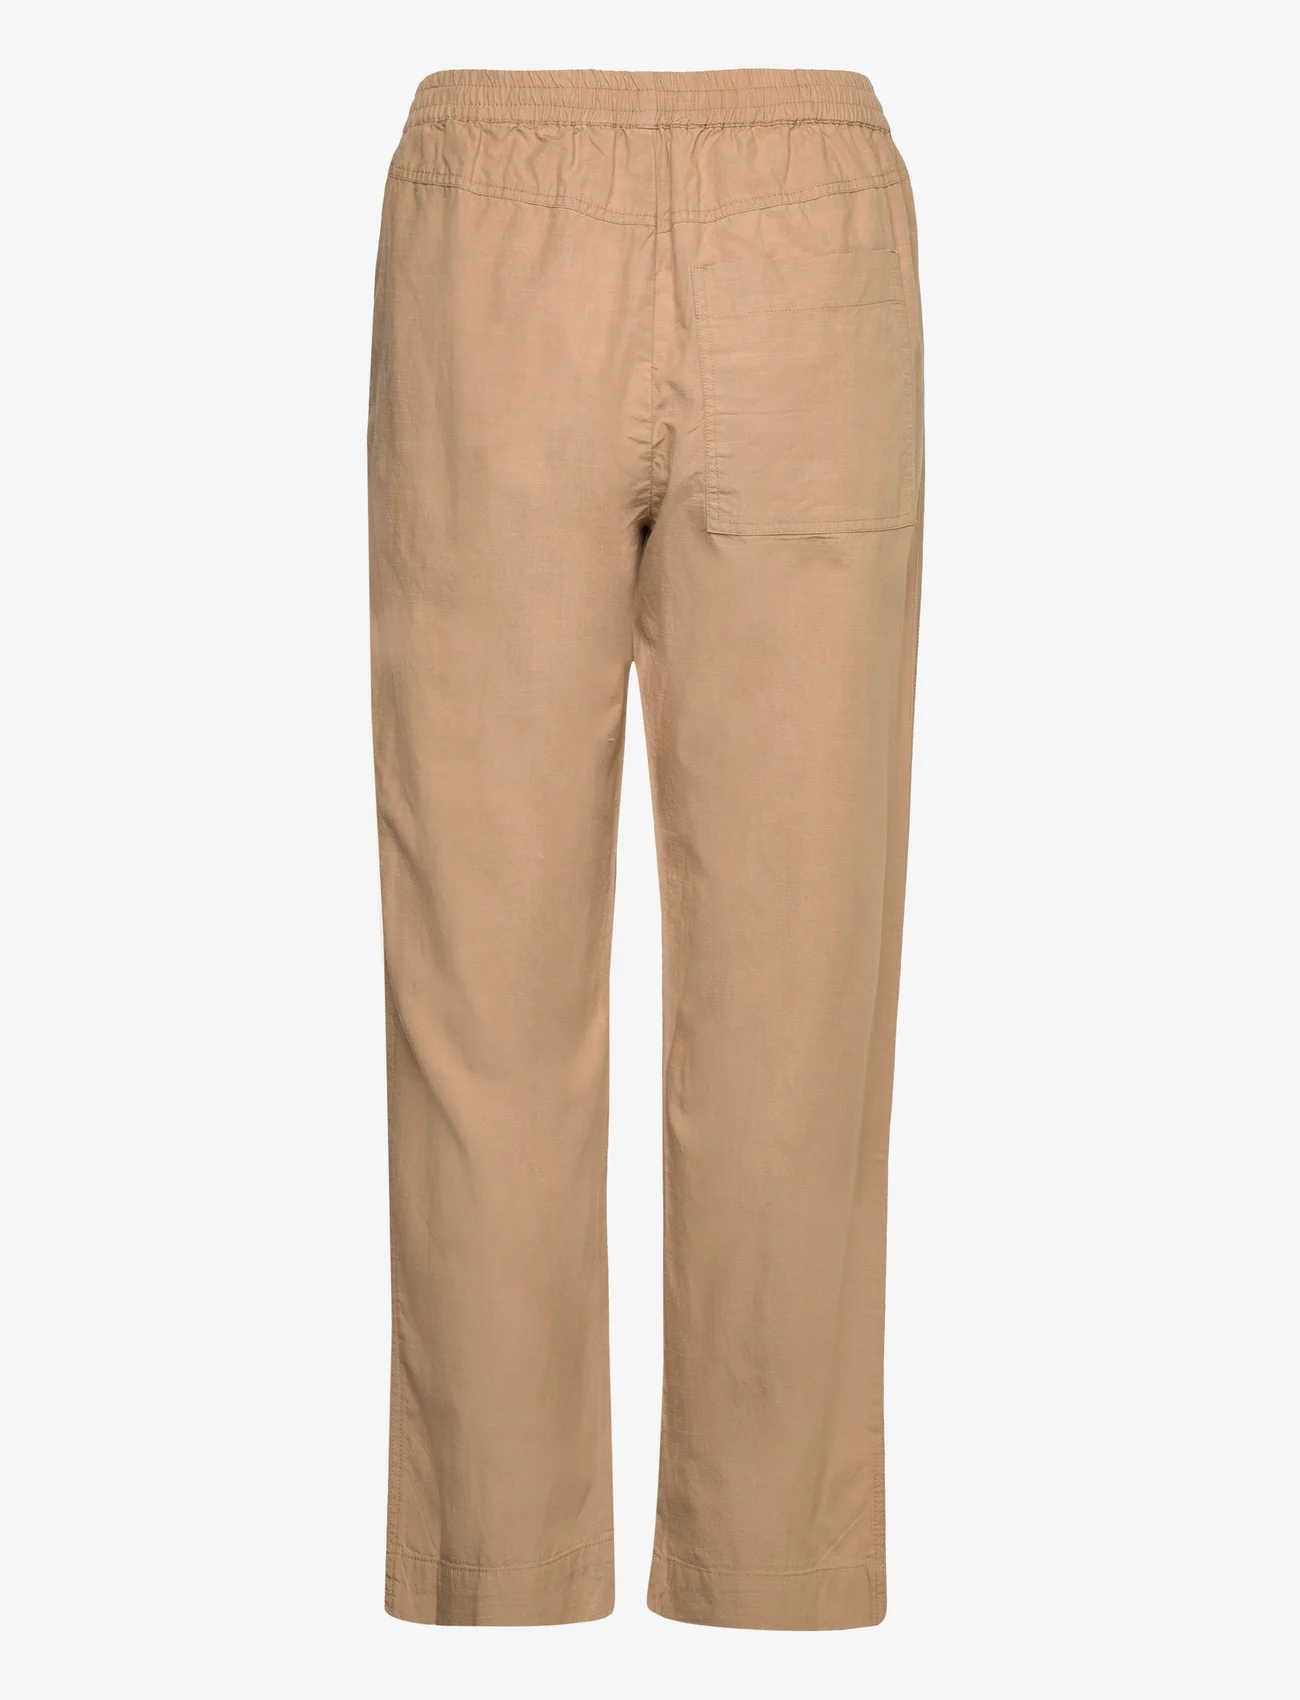 French Connection - ALANIA LYOCELL BLEND TROUSER - raka byxor - incense - 1